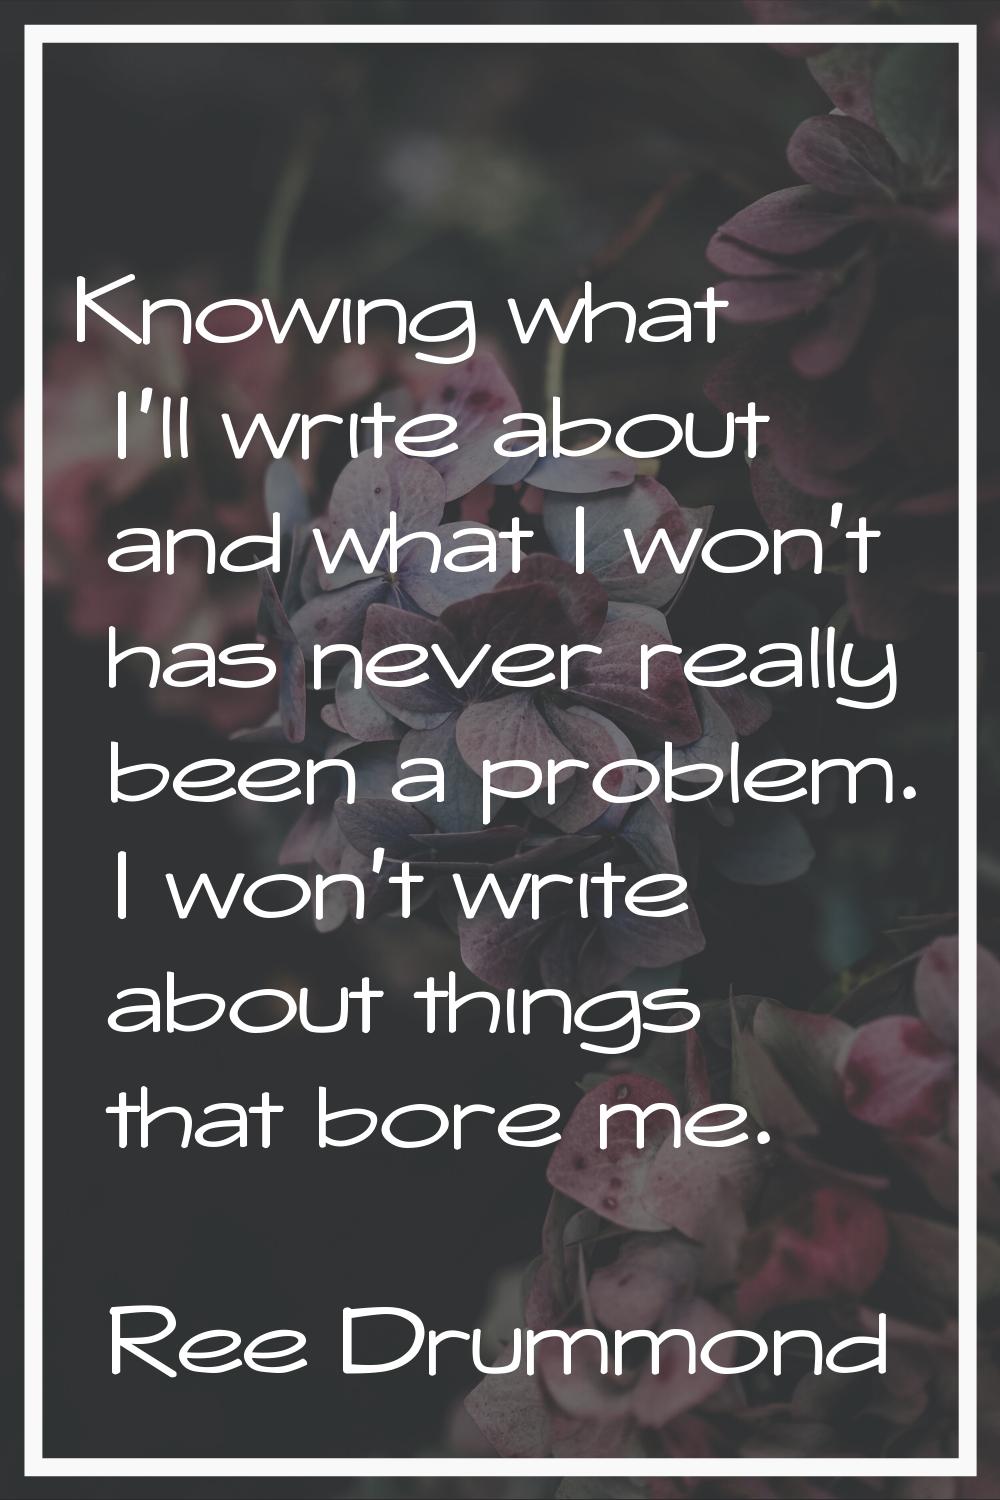 Knowing what I'll write about and what I won't has never really been a problem. I won't write about